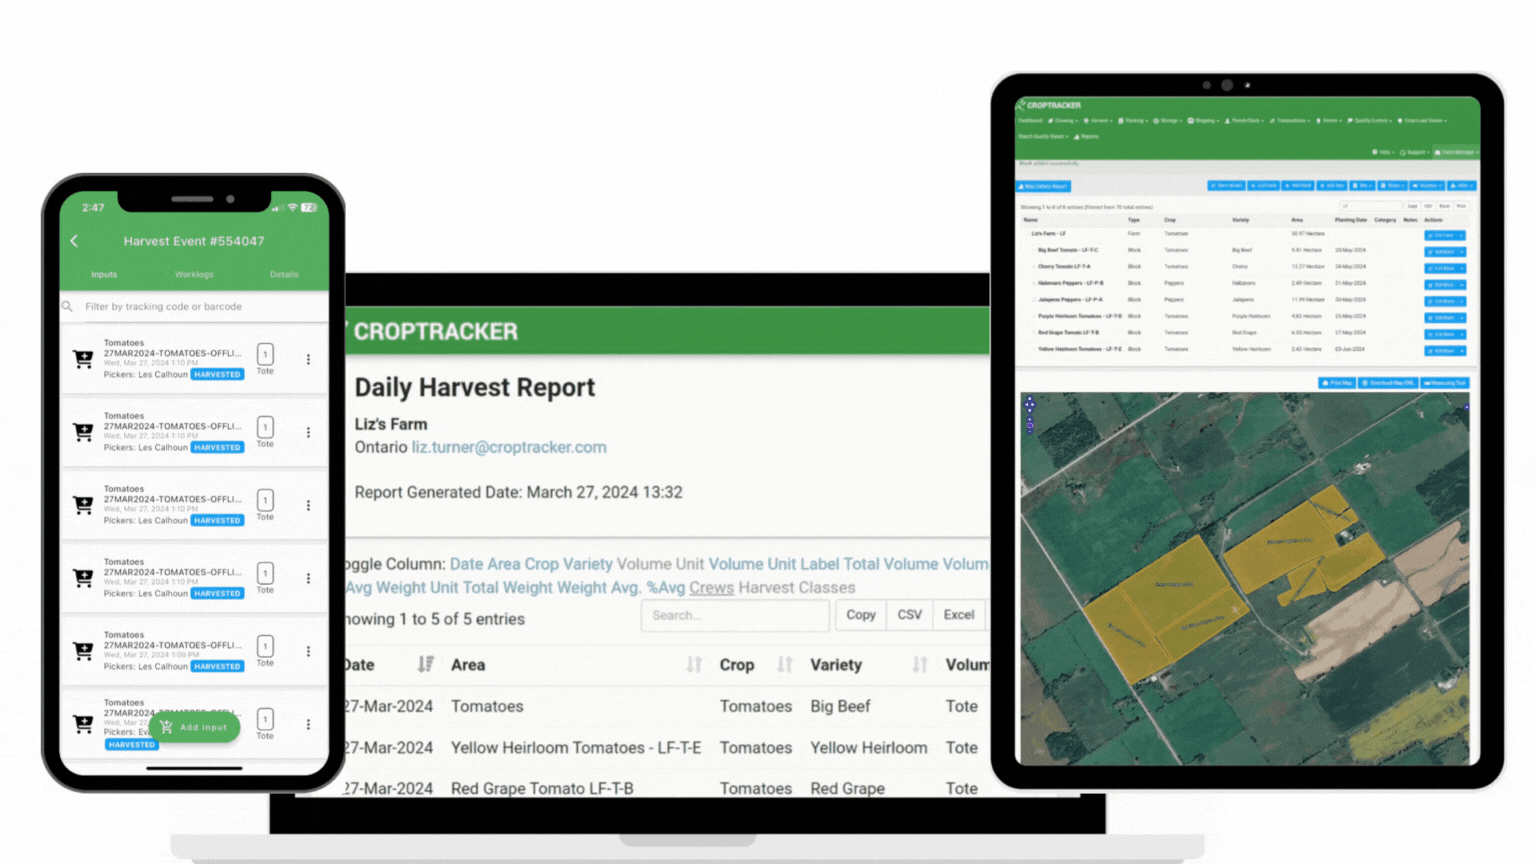 Scrolling through the croptracker reports and app